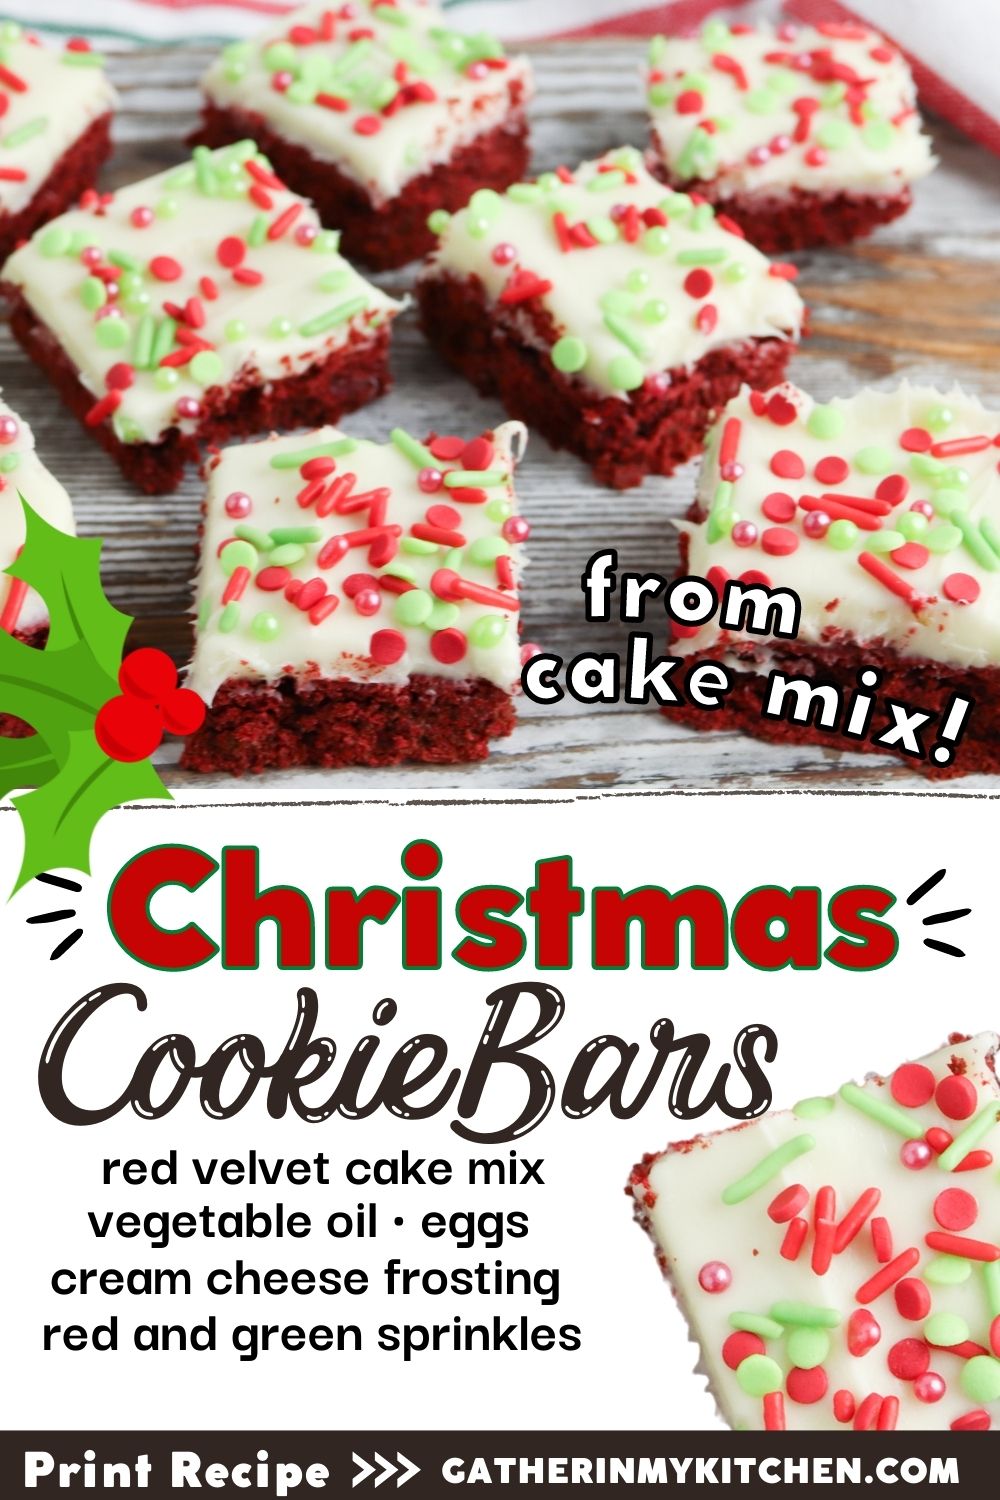 Top has red velvet cookie bars cut and separated, bottom has "Christmas Cookie Bars" with ingredients listed.